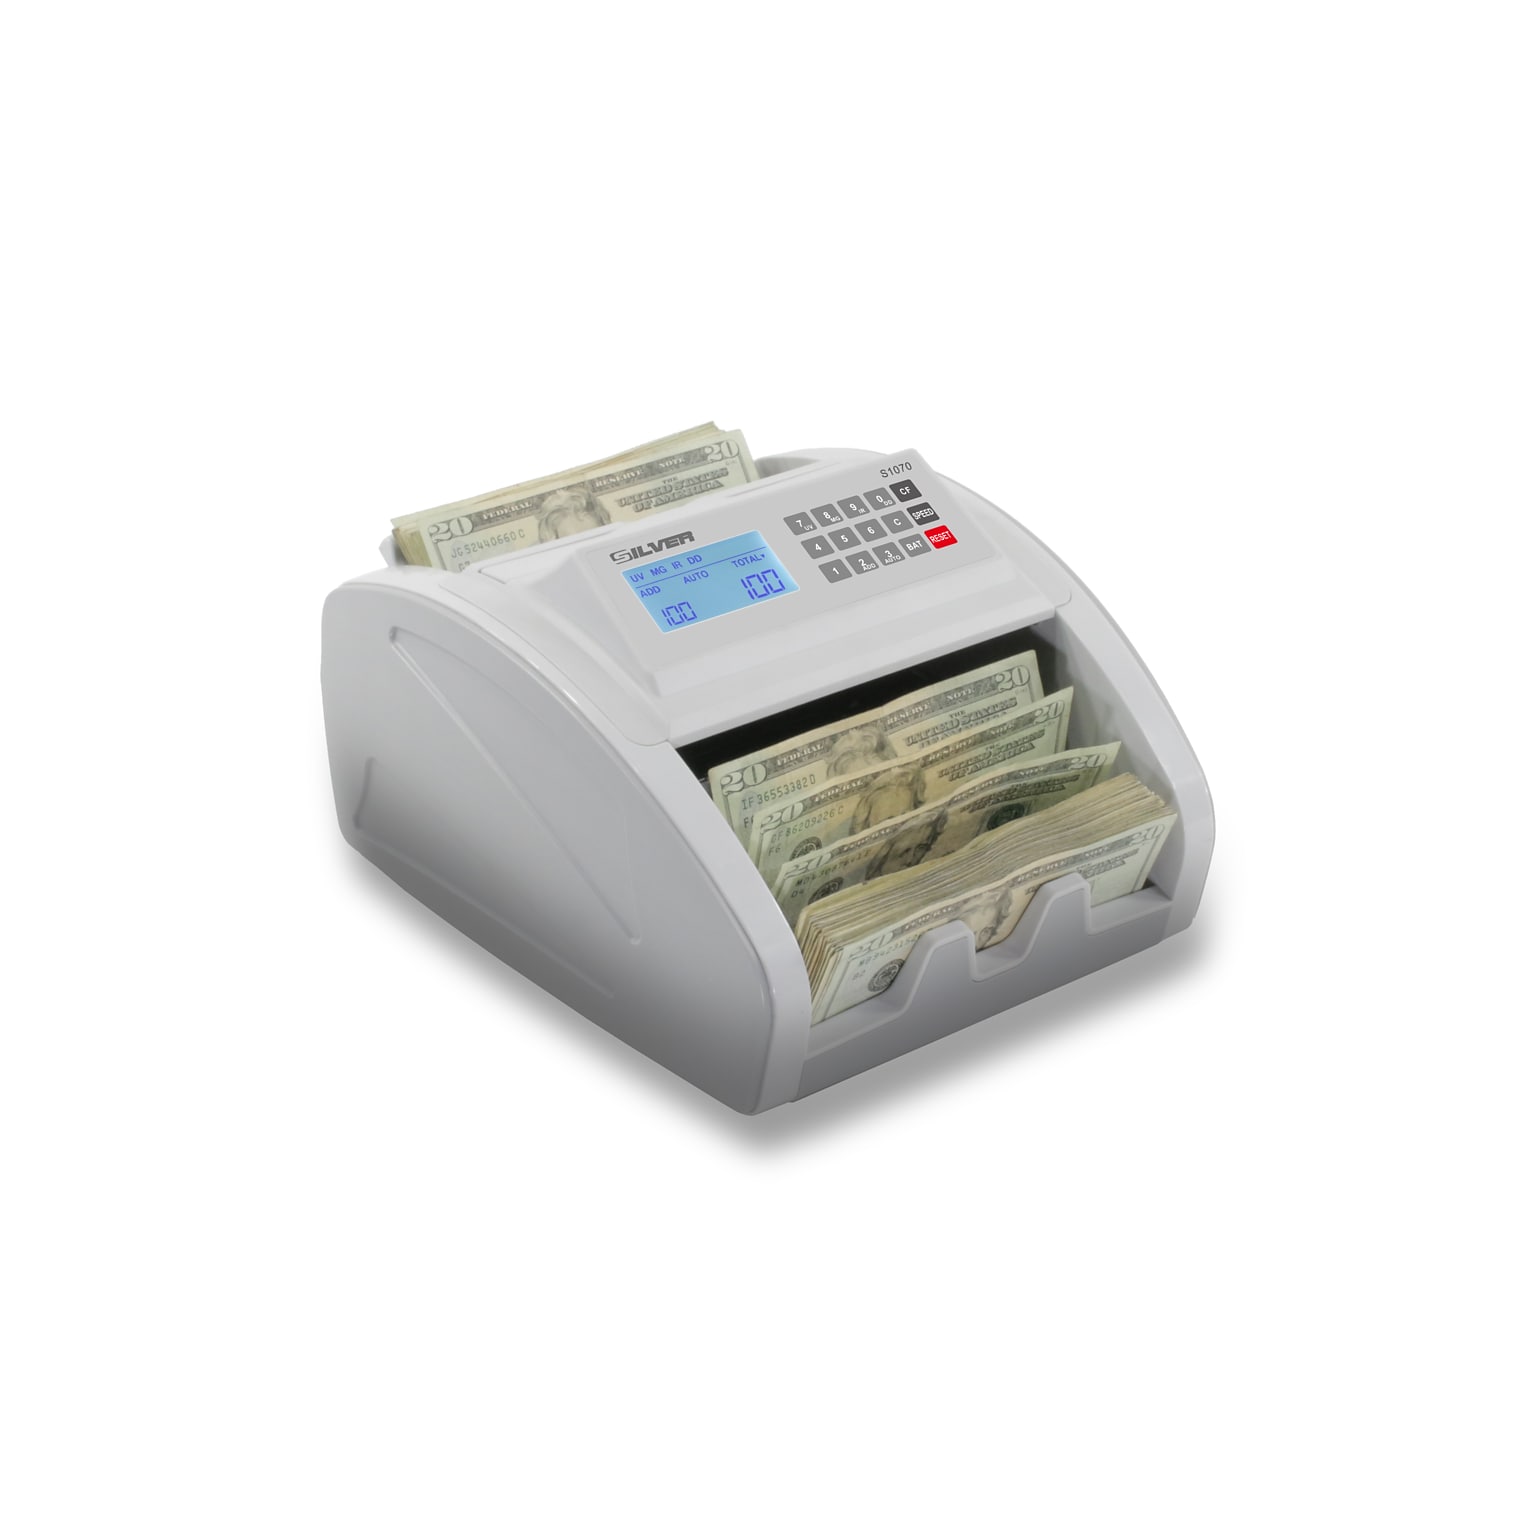 AccuBANKER SILVER by AccuBANKER S1070 Compact Bill Counter (AB1070)